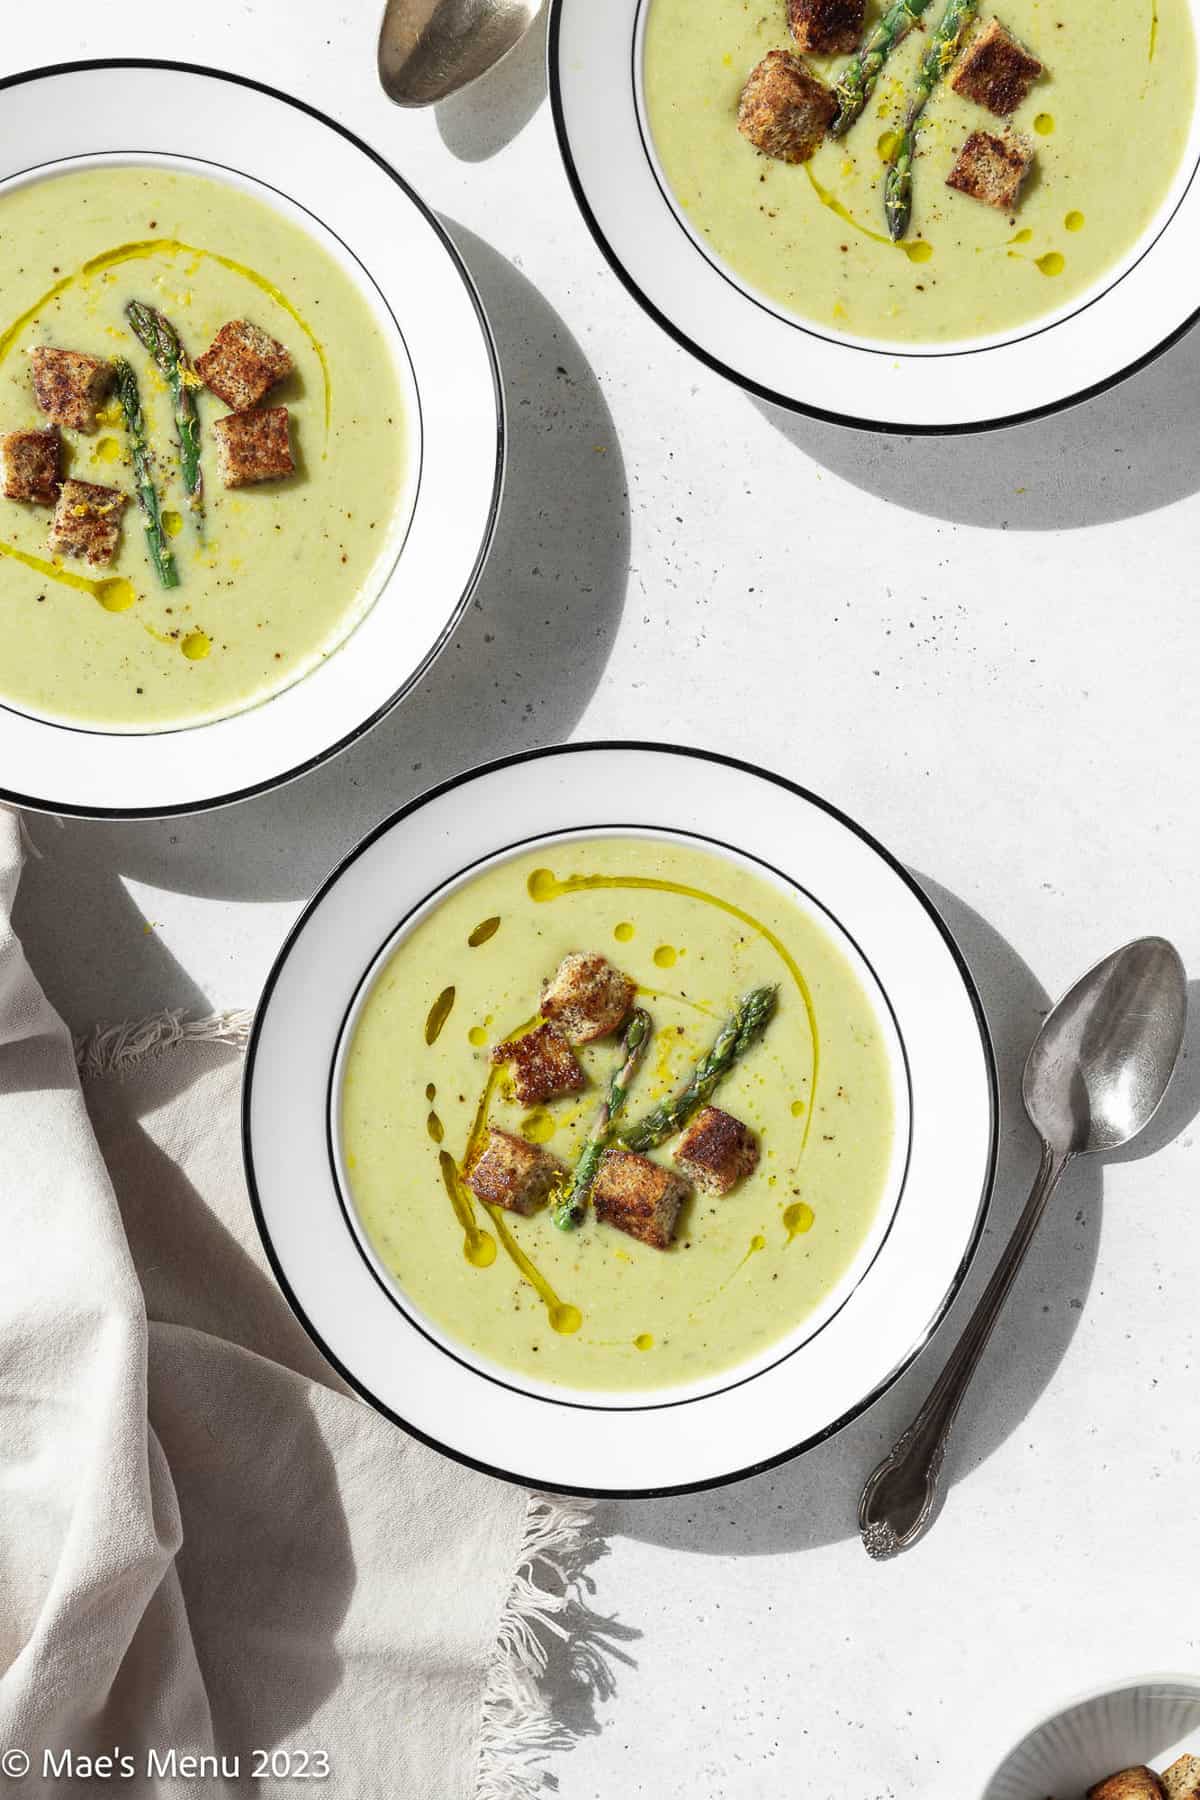 Three bowls of vegan asparagus soup on a white background with spoons and a towel.